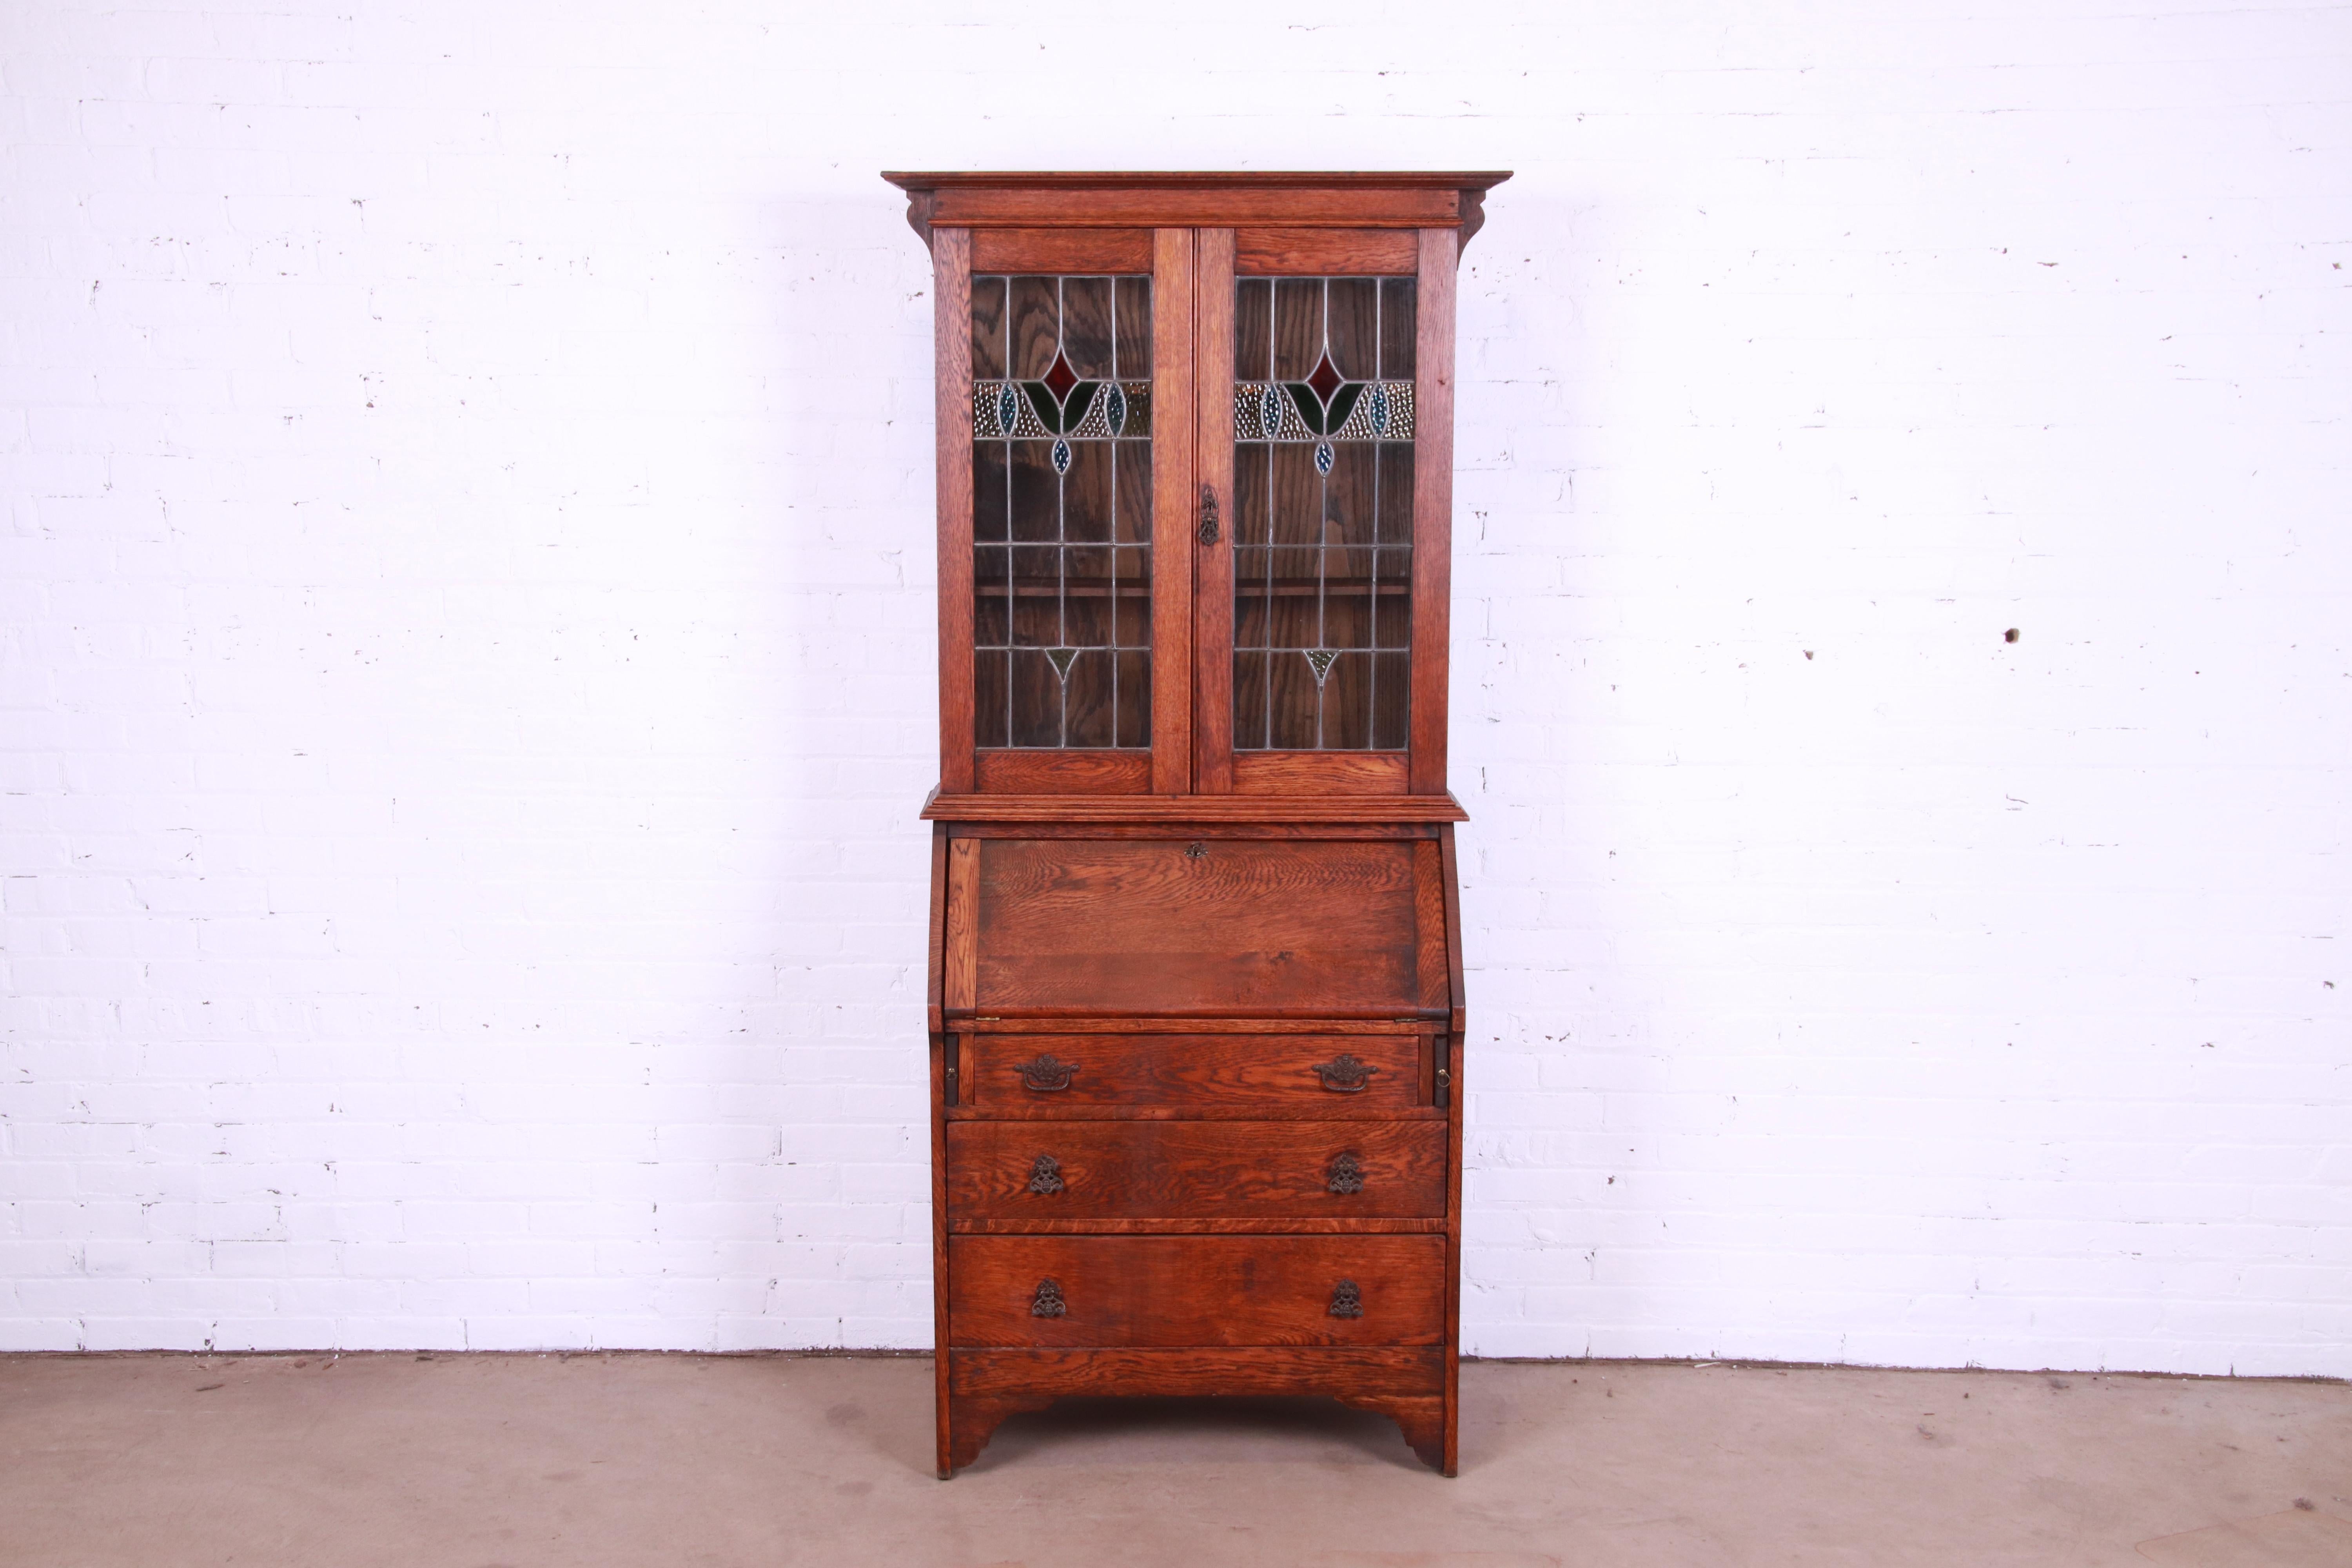 A gorgeous Mission oak Arts & Crafts drop front secretary desk with bookcase hutch

In the manner of Stickley

USA, Circa 1900

Solid oak, with multi-colored stained leaded glass panels and original brass hardware. Cabinet locks, and key is